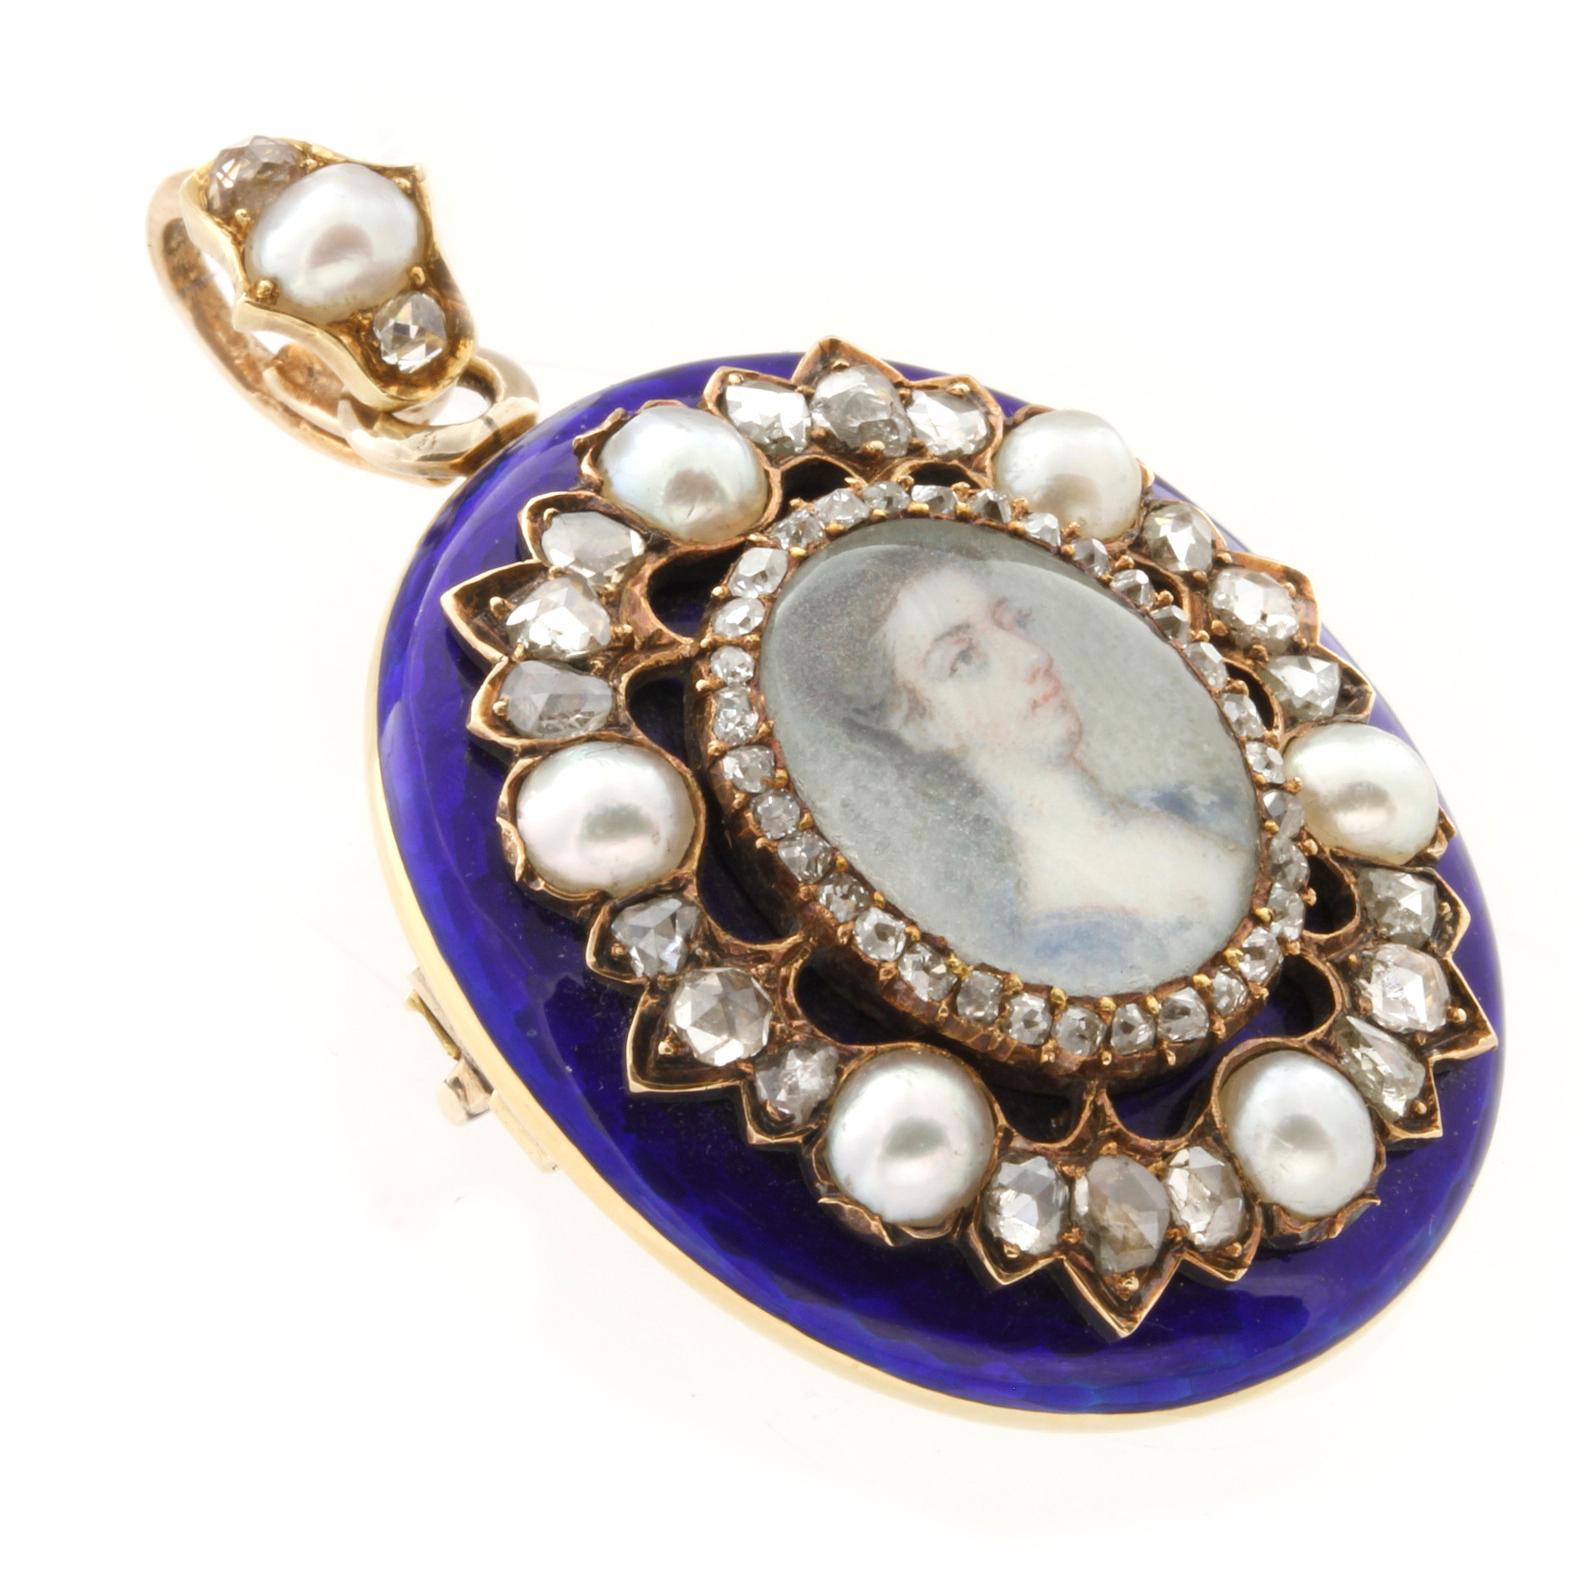 An early Victorian blue enamel, pearl and diamond locket, to the centre a 18th century miniature portrait depicting the head of a lady in a blue dress, within a border of old-cut diamonds on a blue enamel oval mount set with half pearls and rose-cut